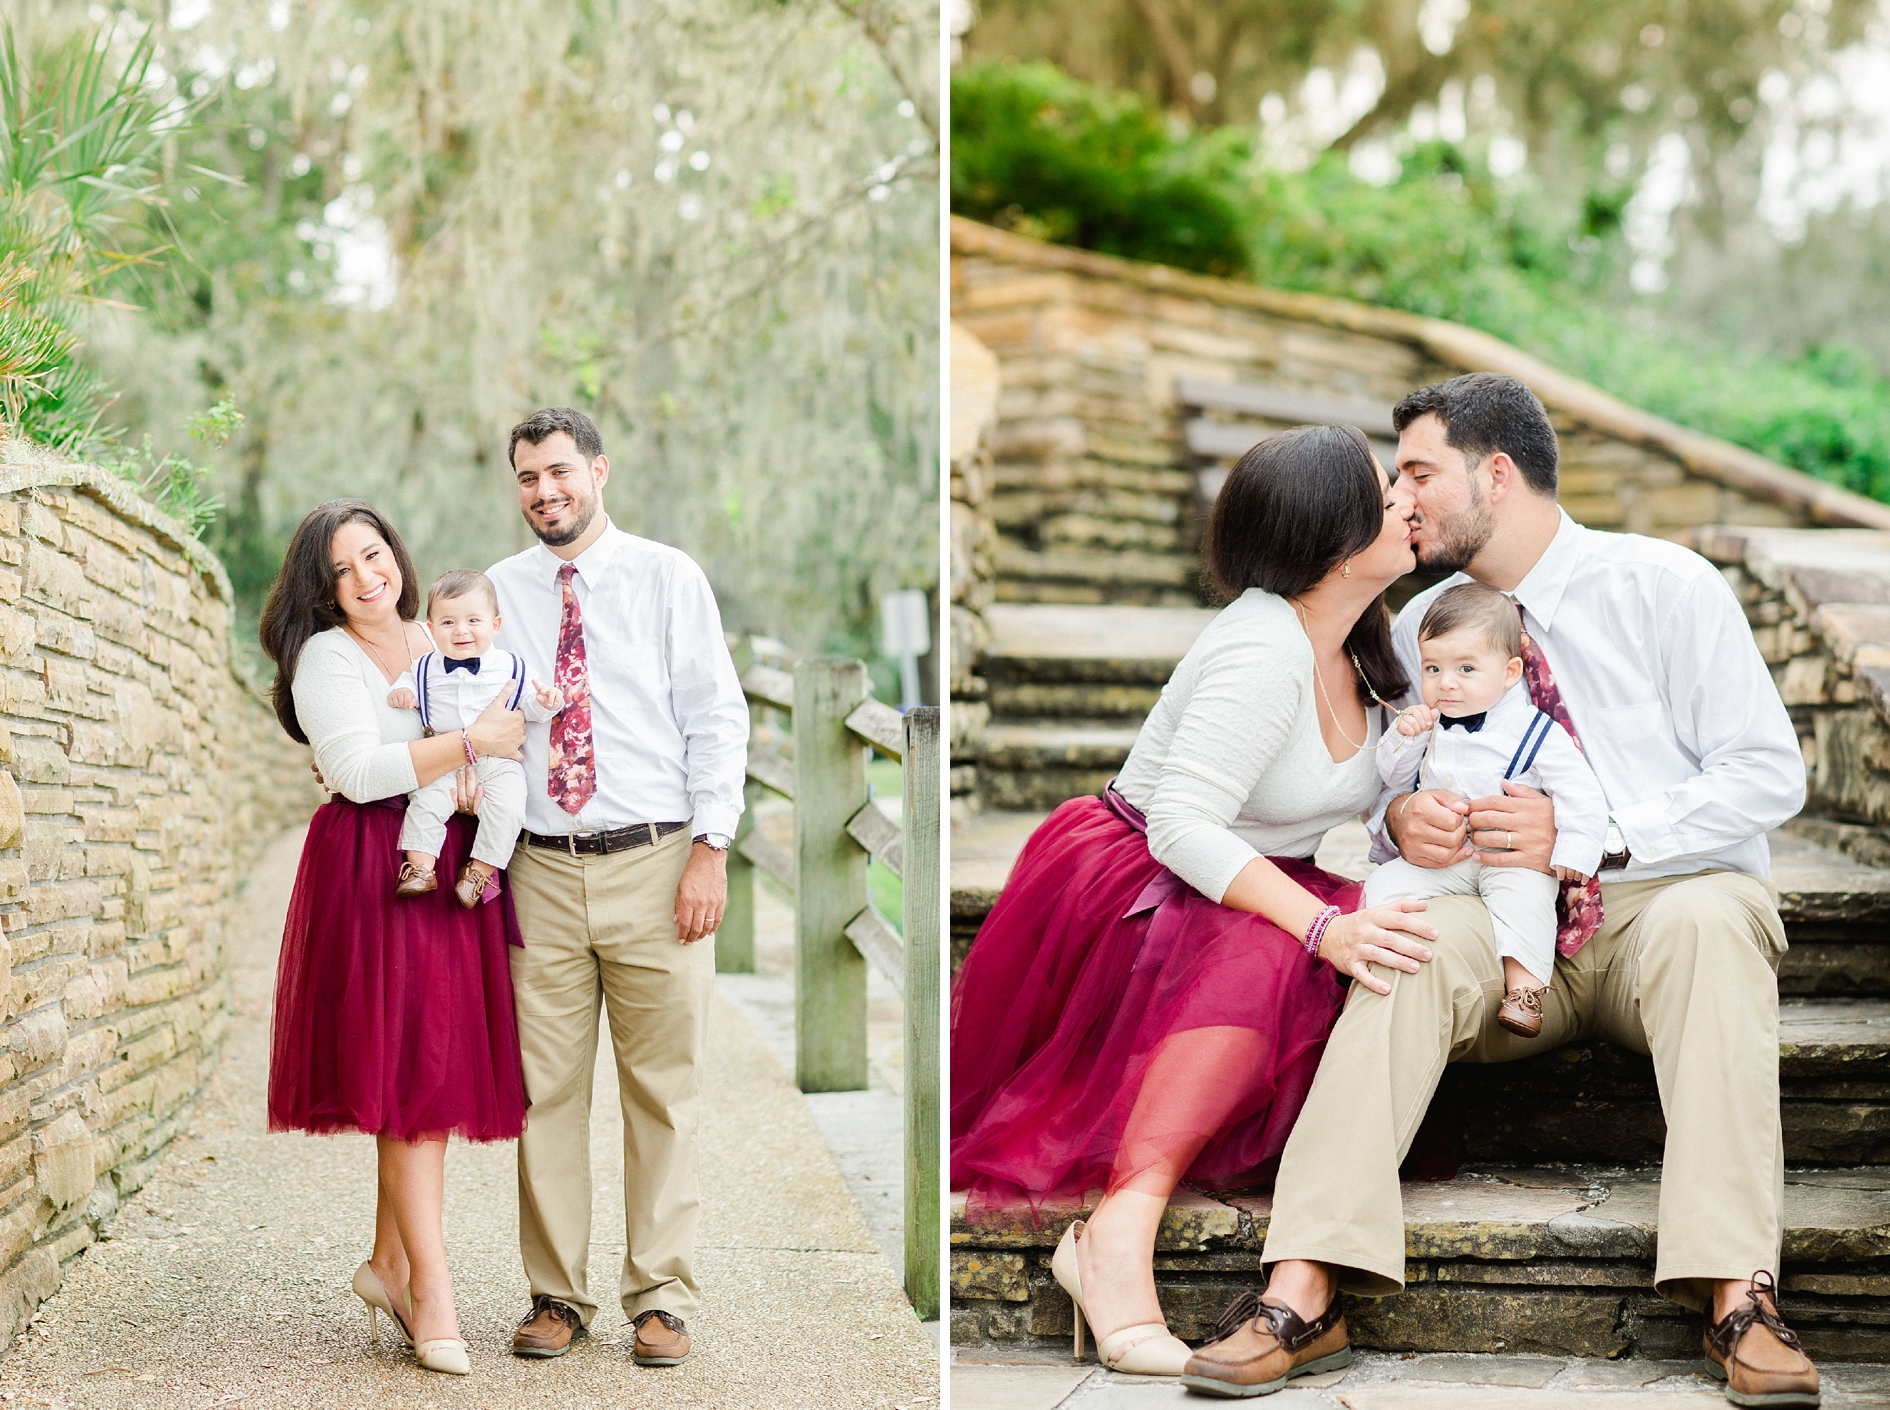 The Giangreco Family | Tampa Family Photographer | © Ailyn La Torre Photography 2017